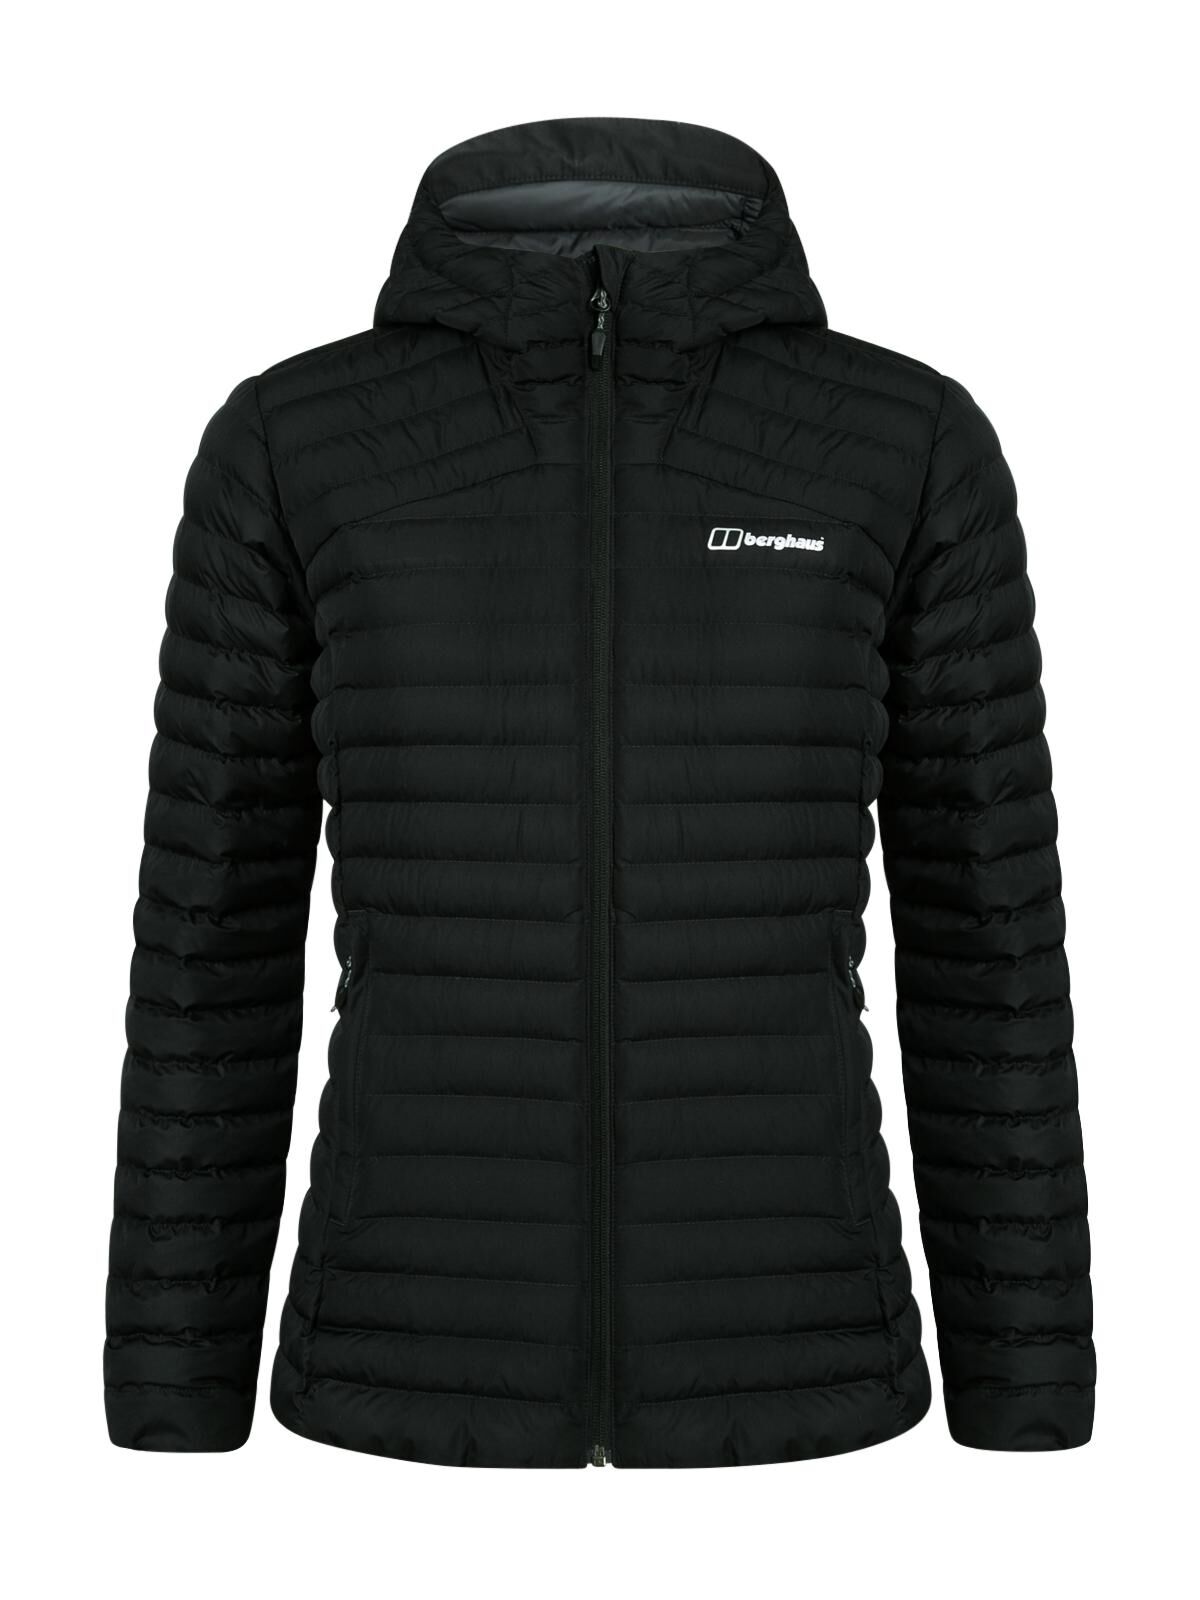 Berghaus Nula Micro Insulated Jacket - Synthetic jacket - Women's